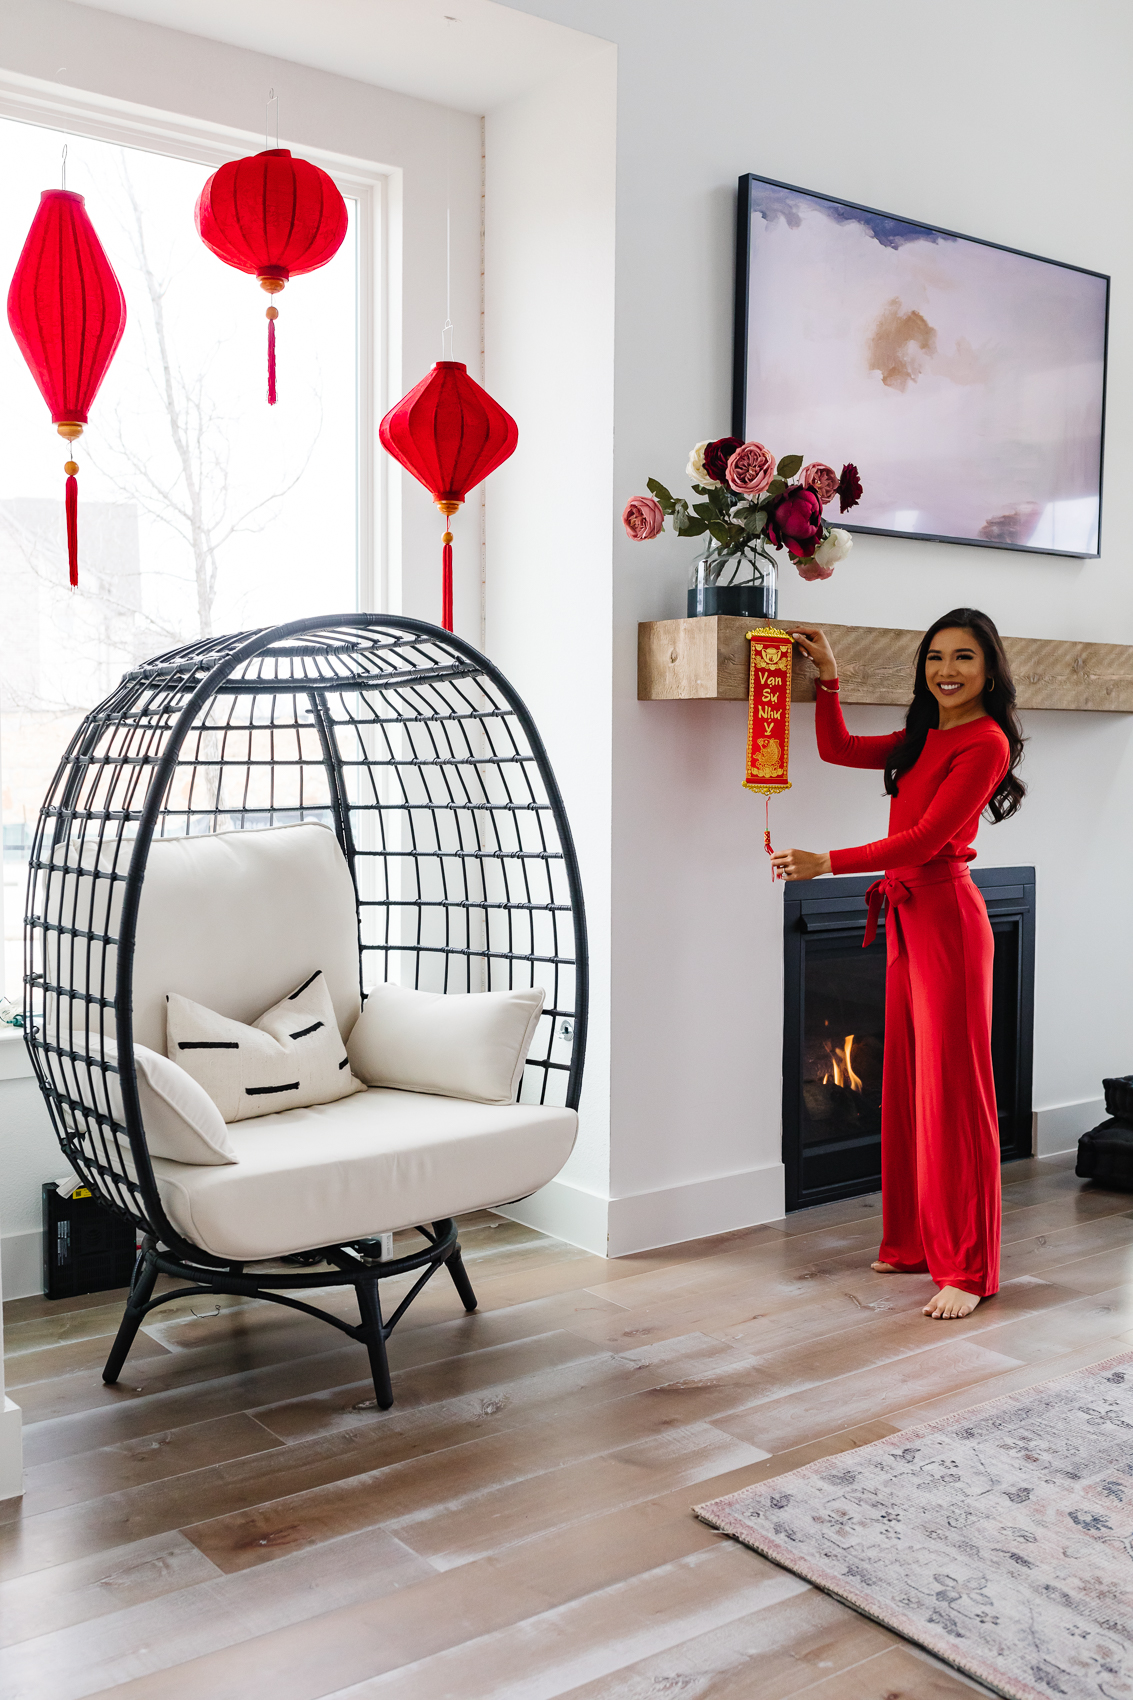 Lunar New Year decorations like red silk lanterns and couplets to decorate for Lunar New Year or Tet Vietnamese New Year in a transitional home